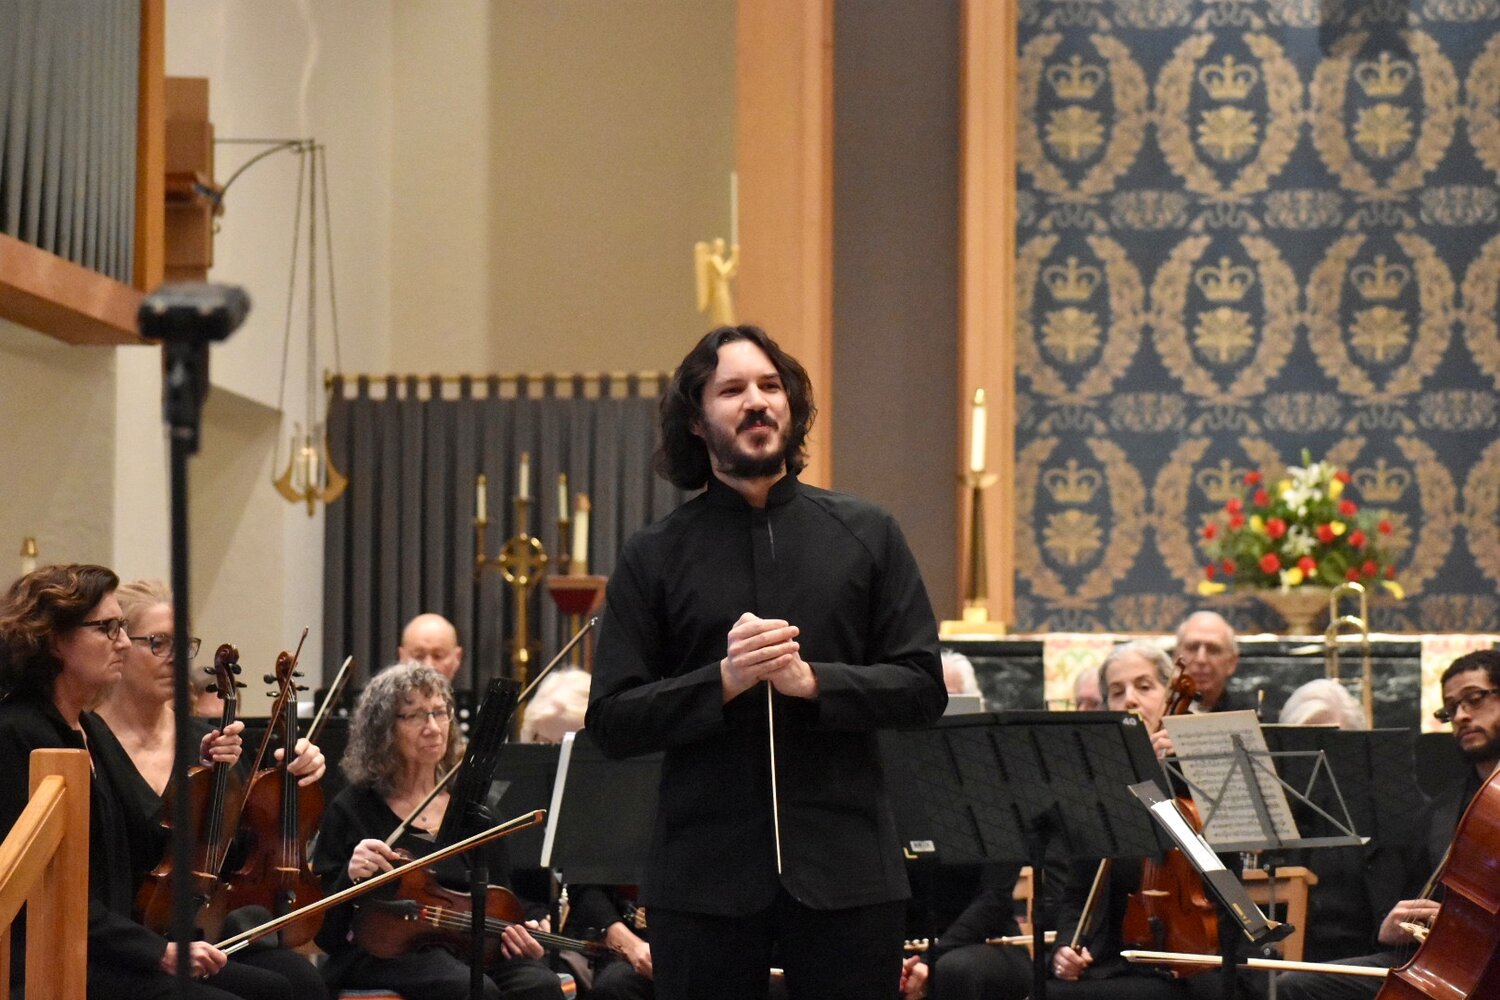 Eric Stewart has served the Island Symphony Orchestra for over five years as music director.